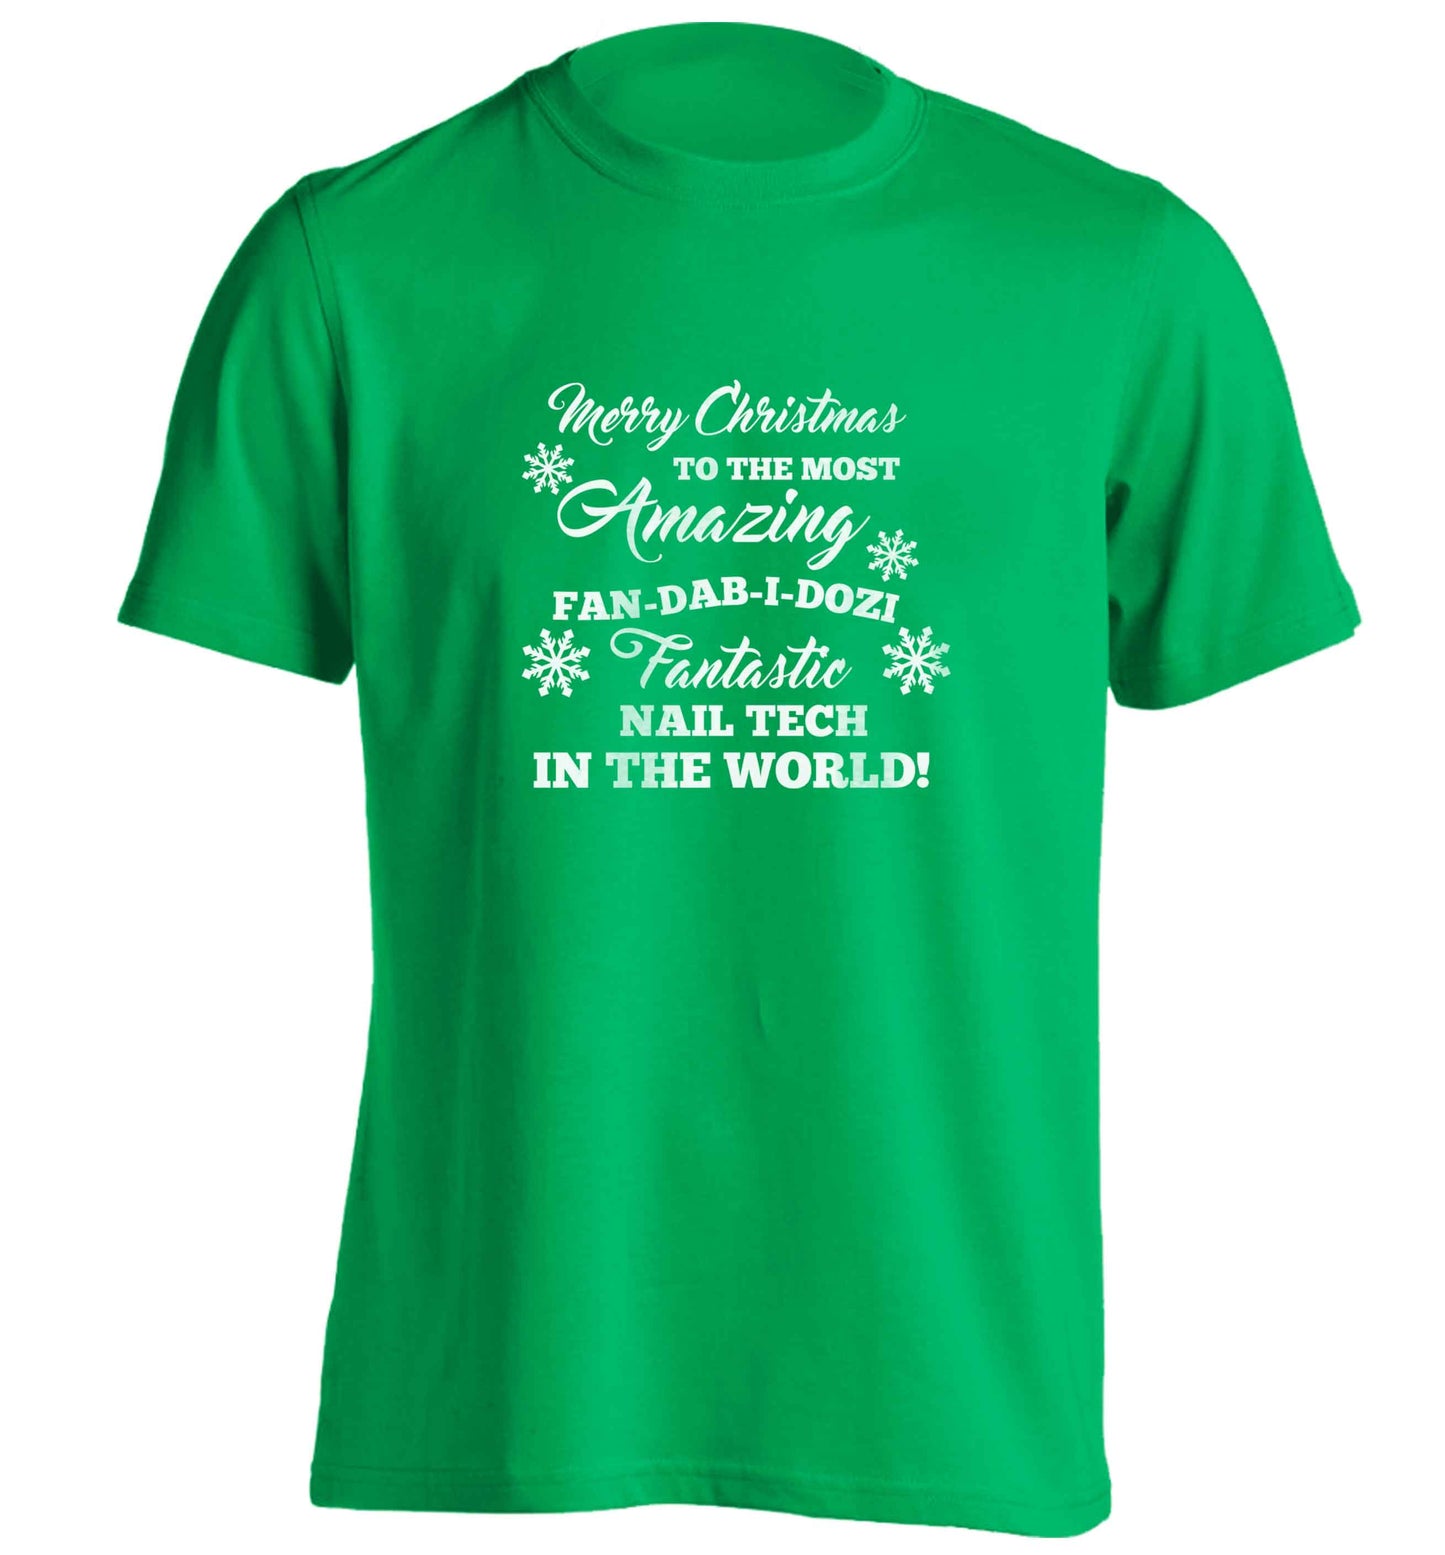 Merry Christmas to the most amazing fan-dab-i-dozi fantasic nail technician in the world adults unisex green Tshirt 2XL